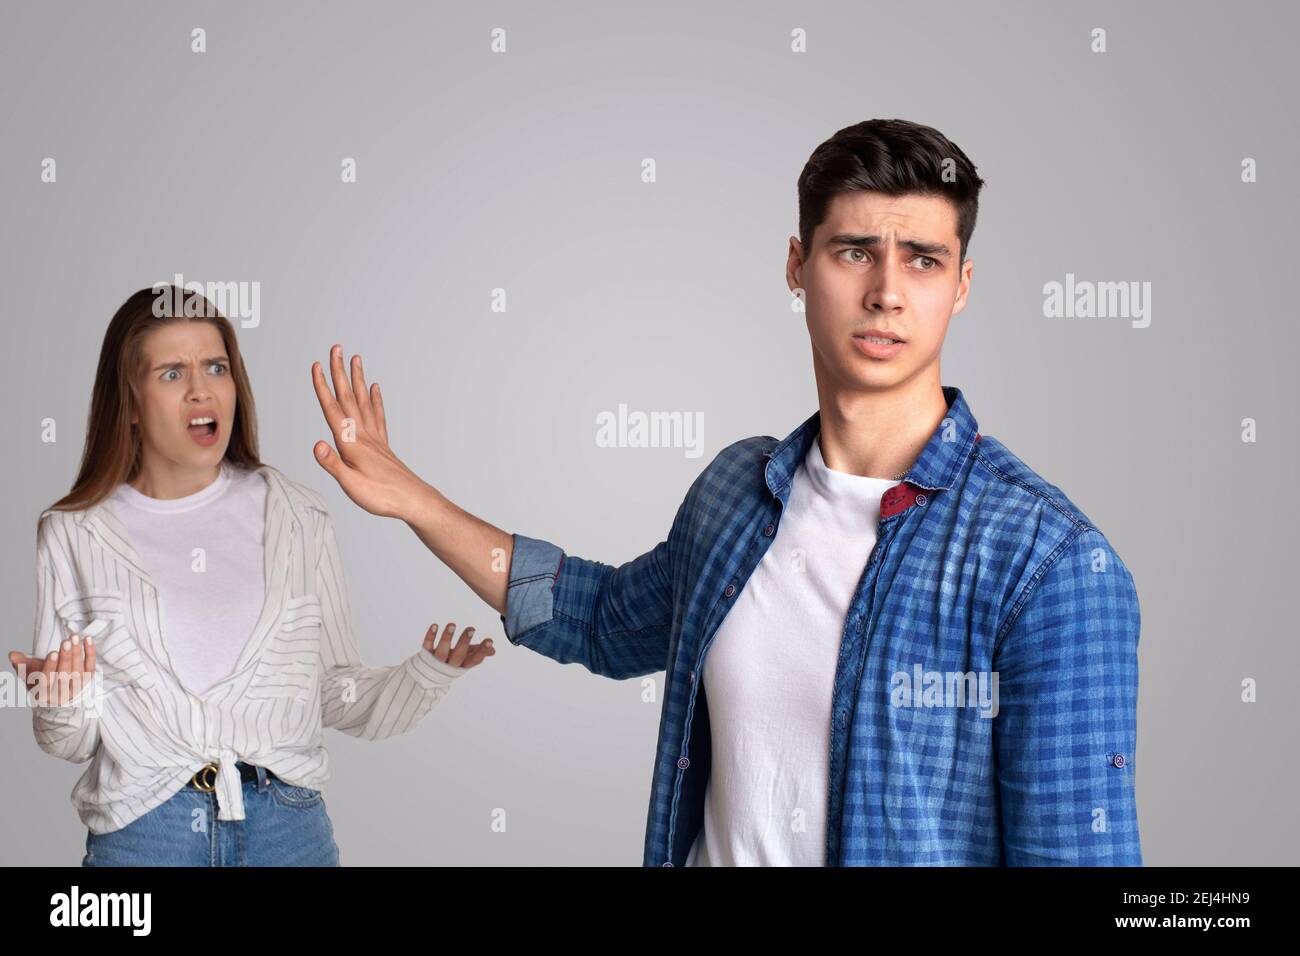 Parting, quarrel, problems in family and freaking out Stock Photo